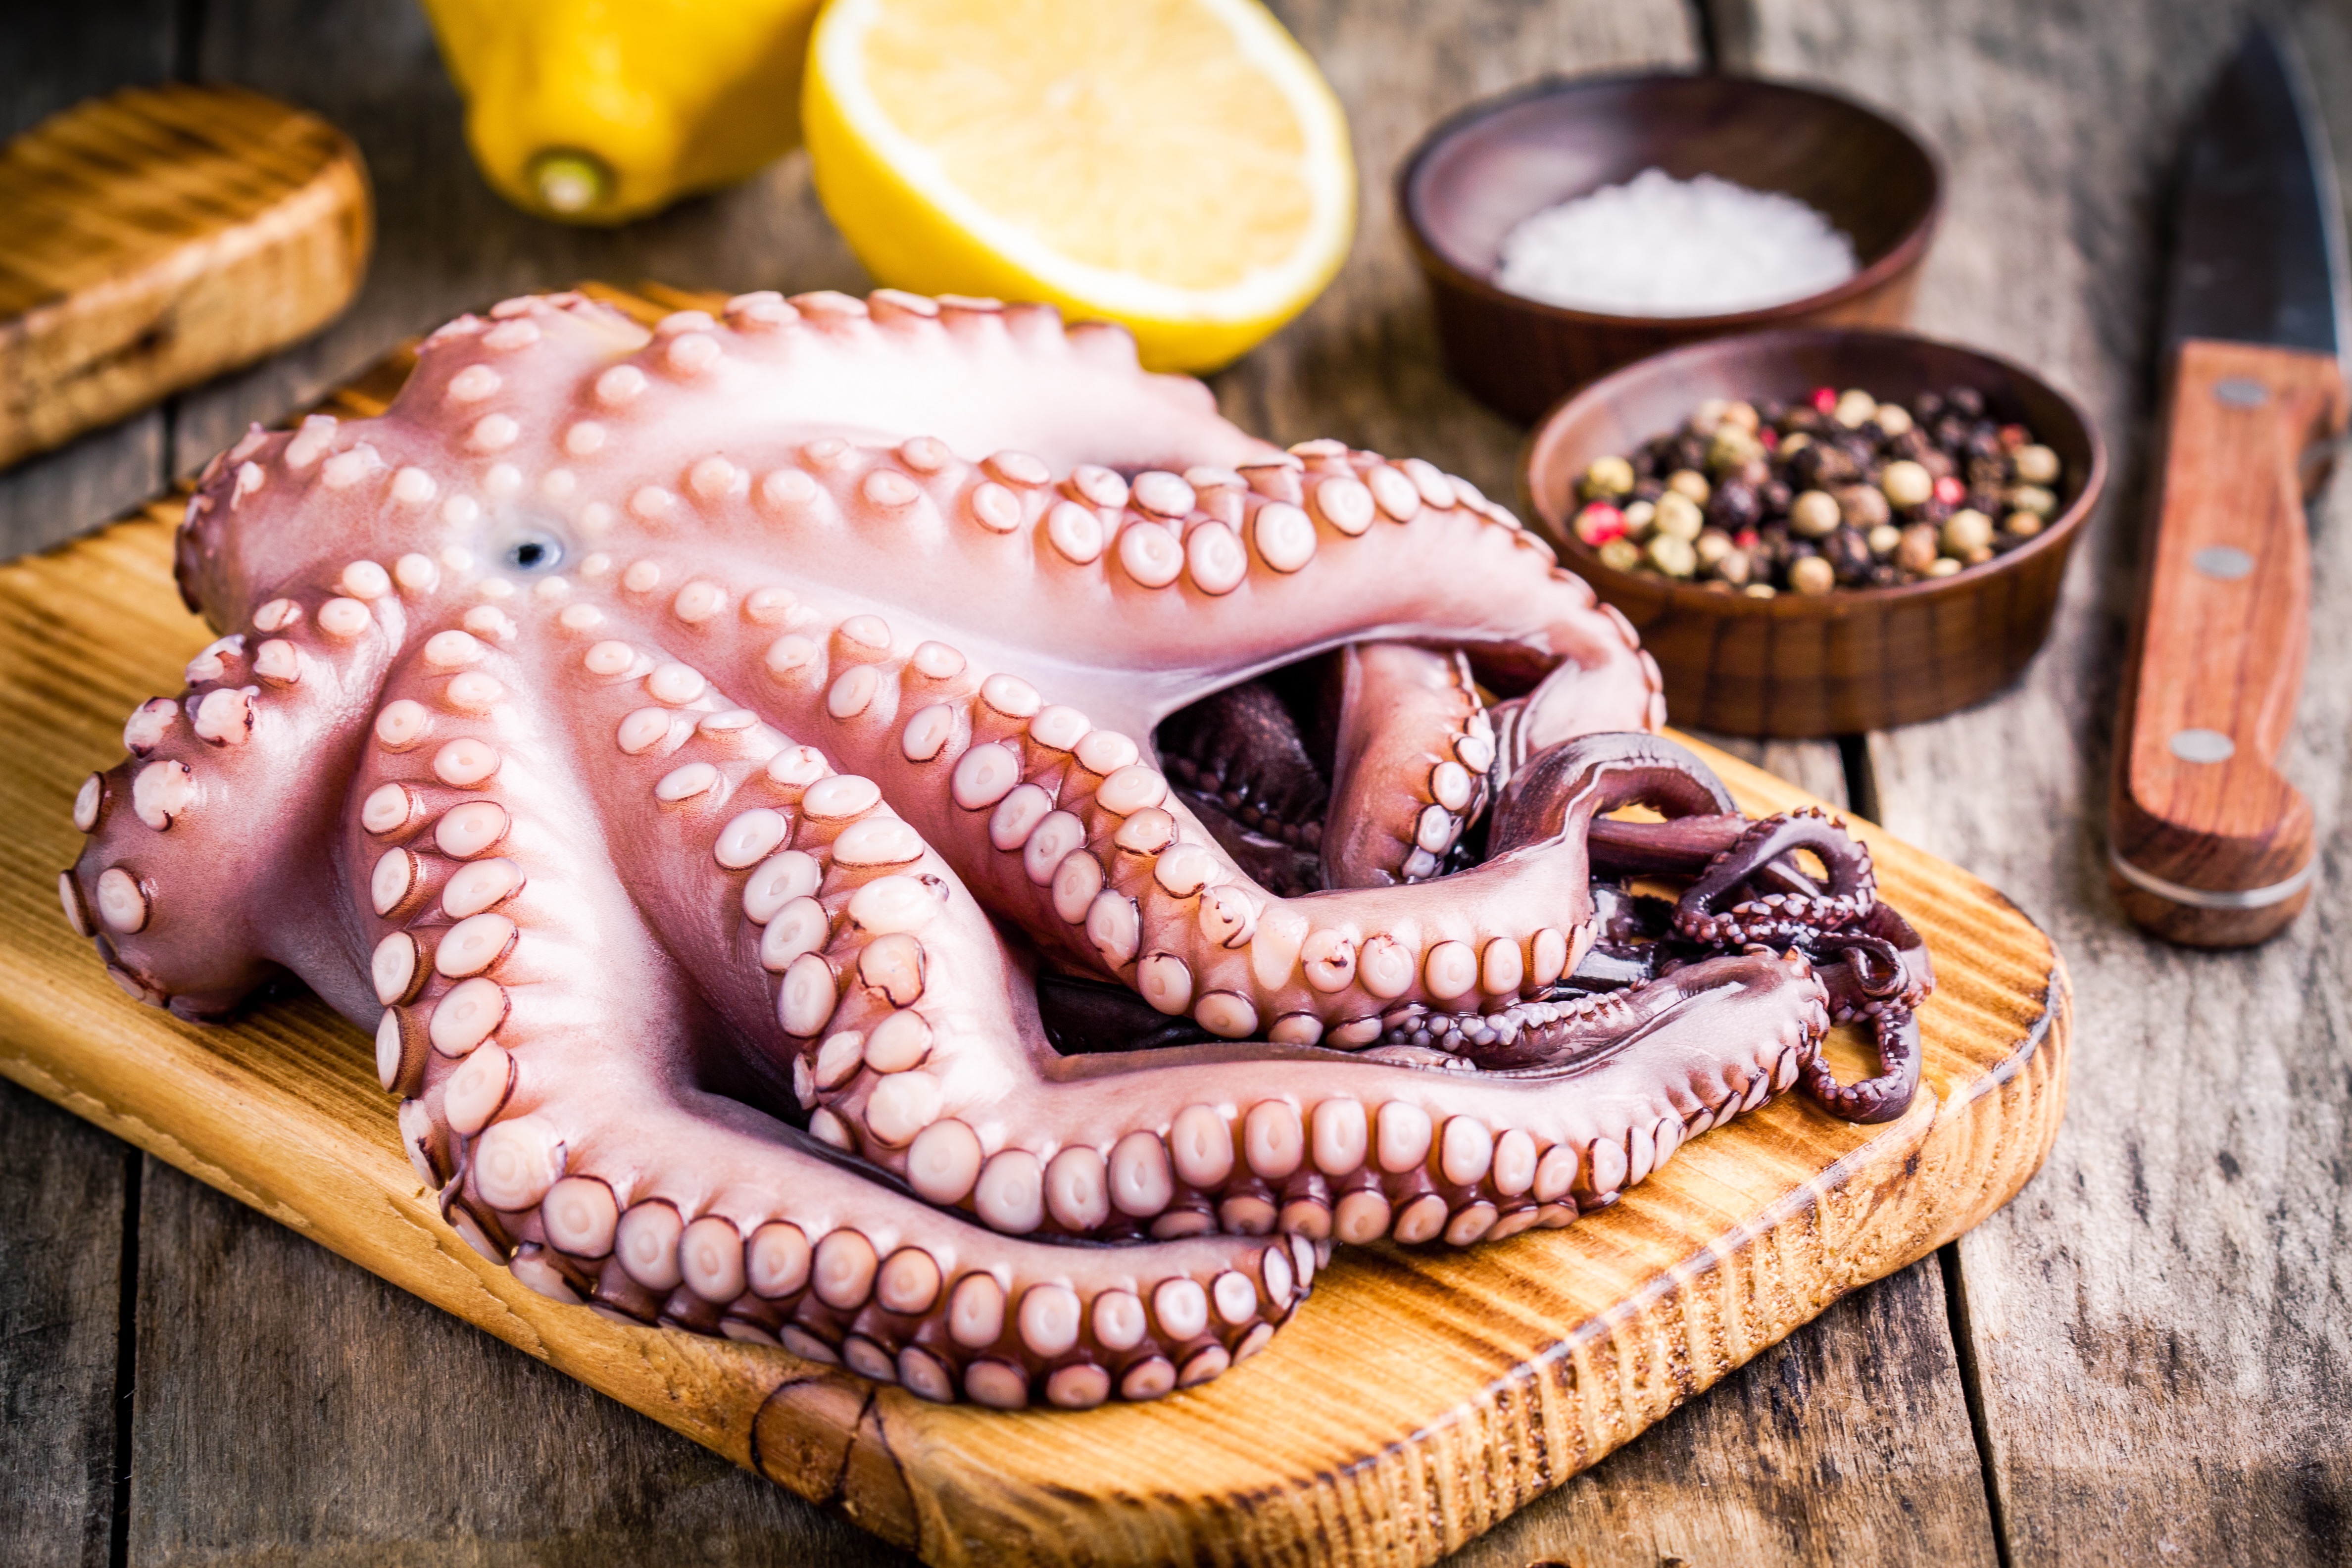 Squid and Octopus Export: The first warm sunlight after gloomy days